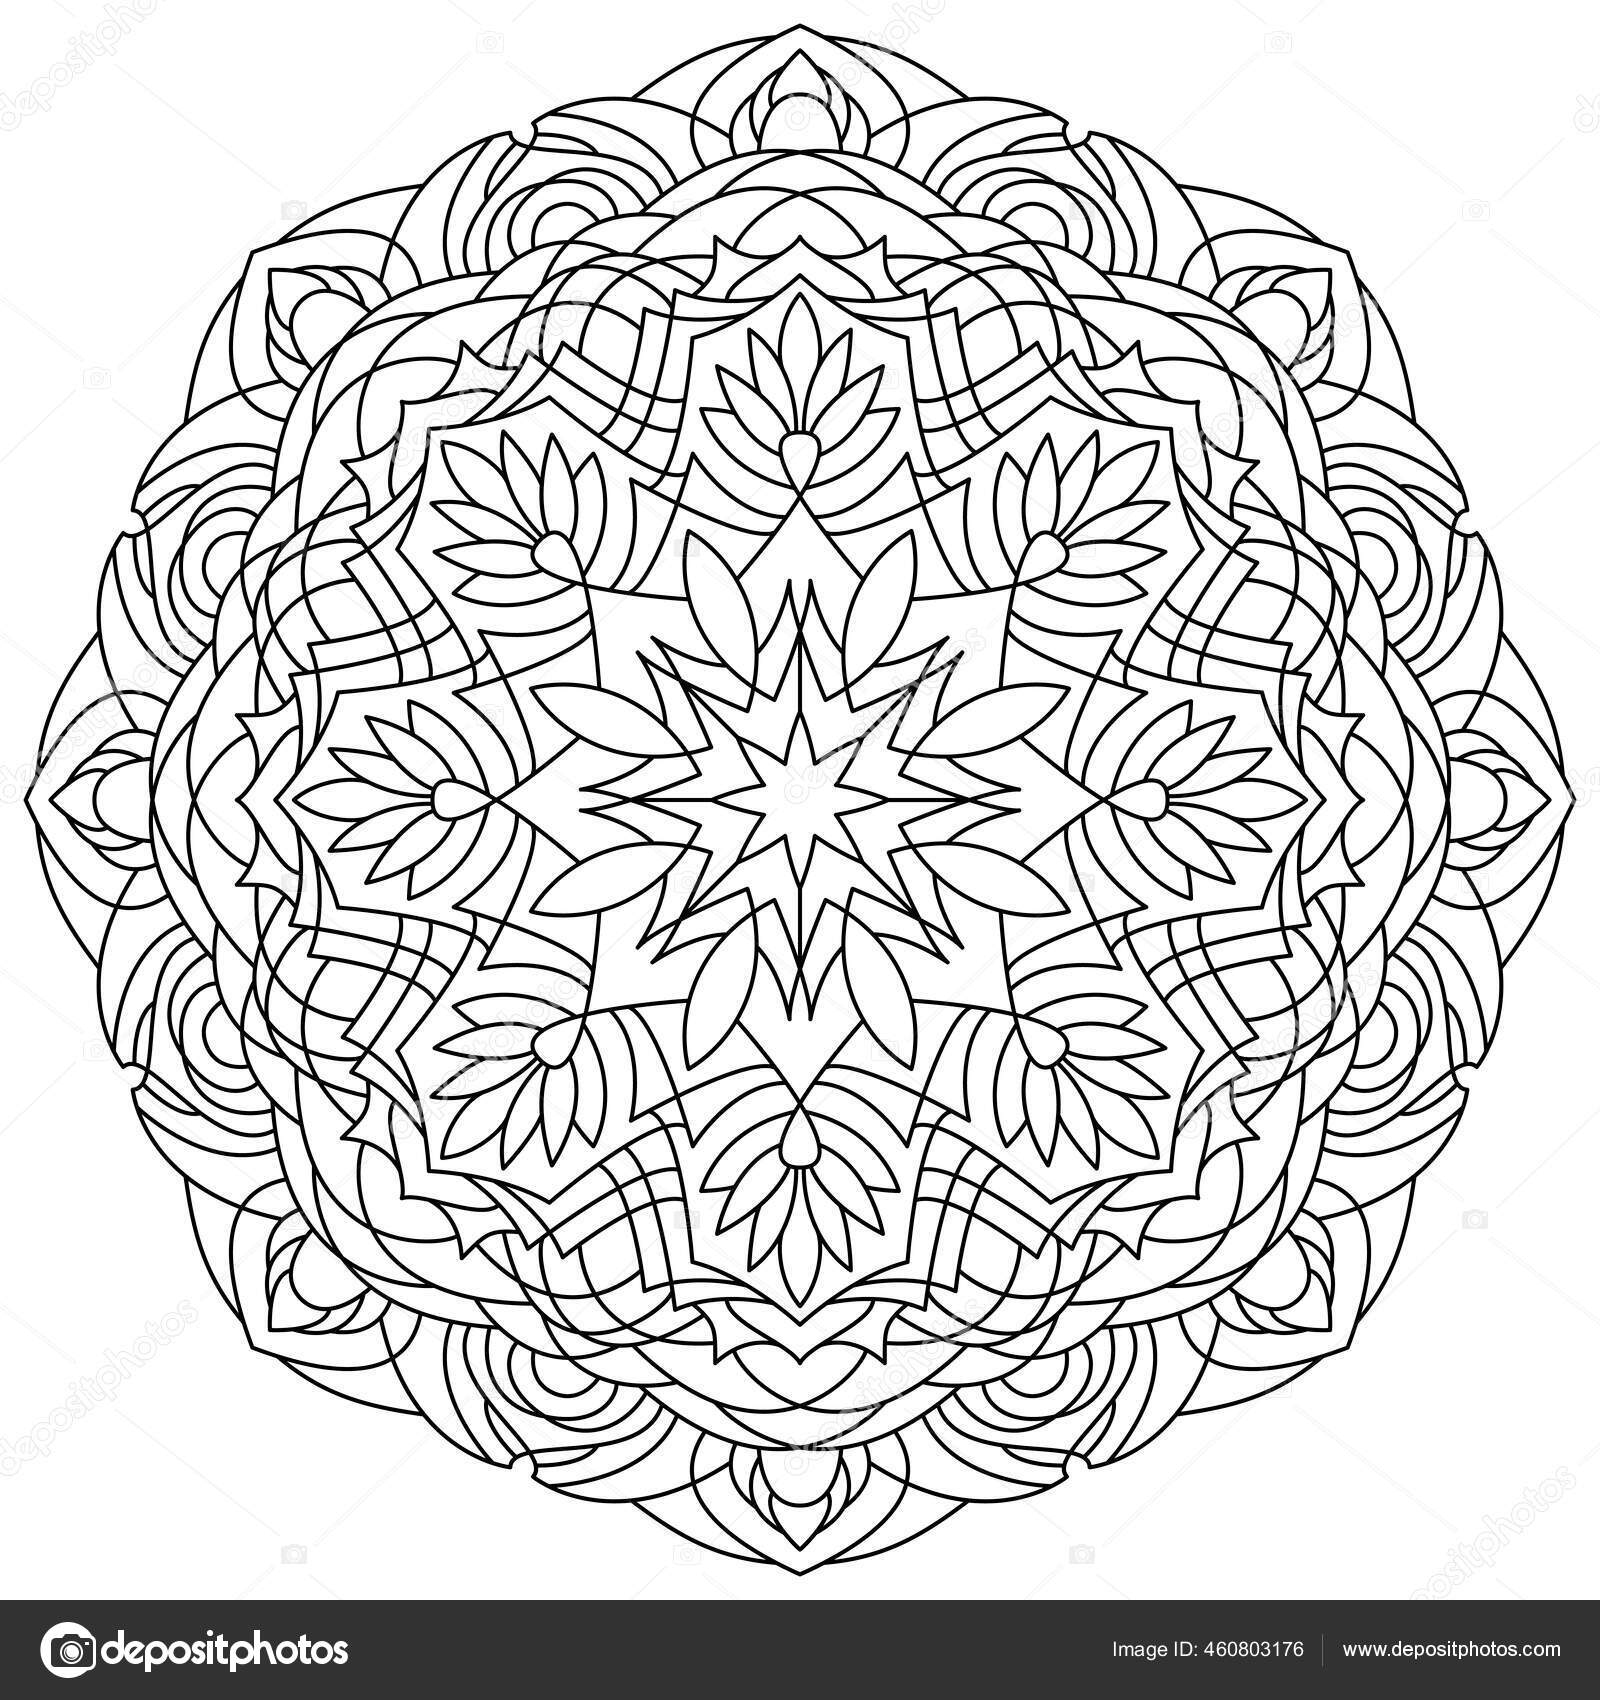 Photo Circular pattern in the form of a mandala